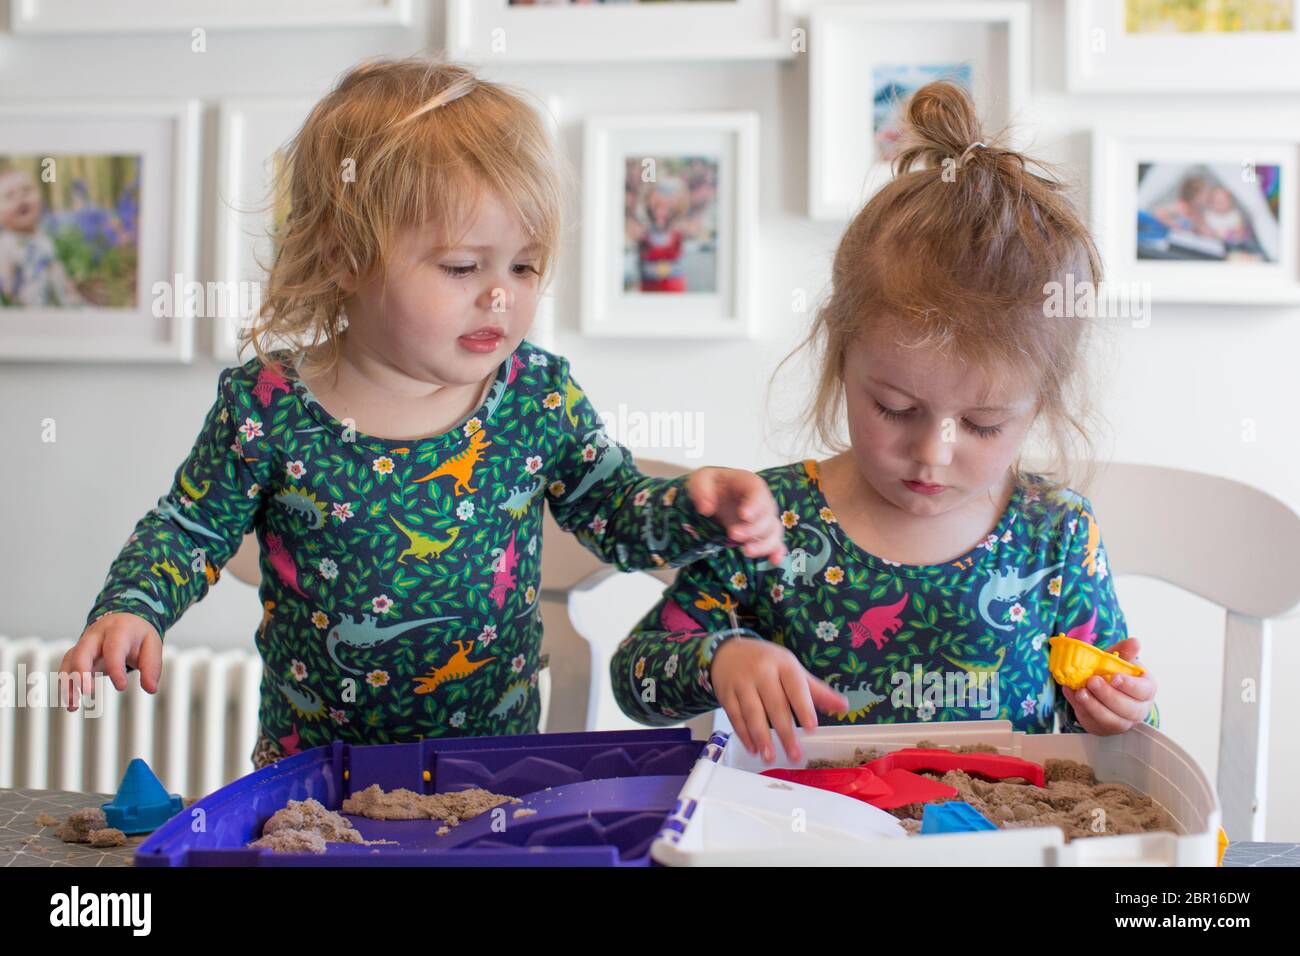 Two young children playing indoors at the table with a sand box, UK Stock Photo